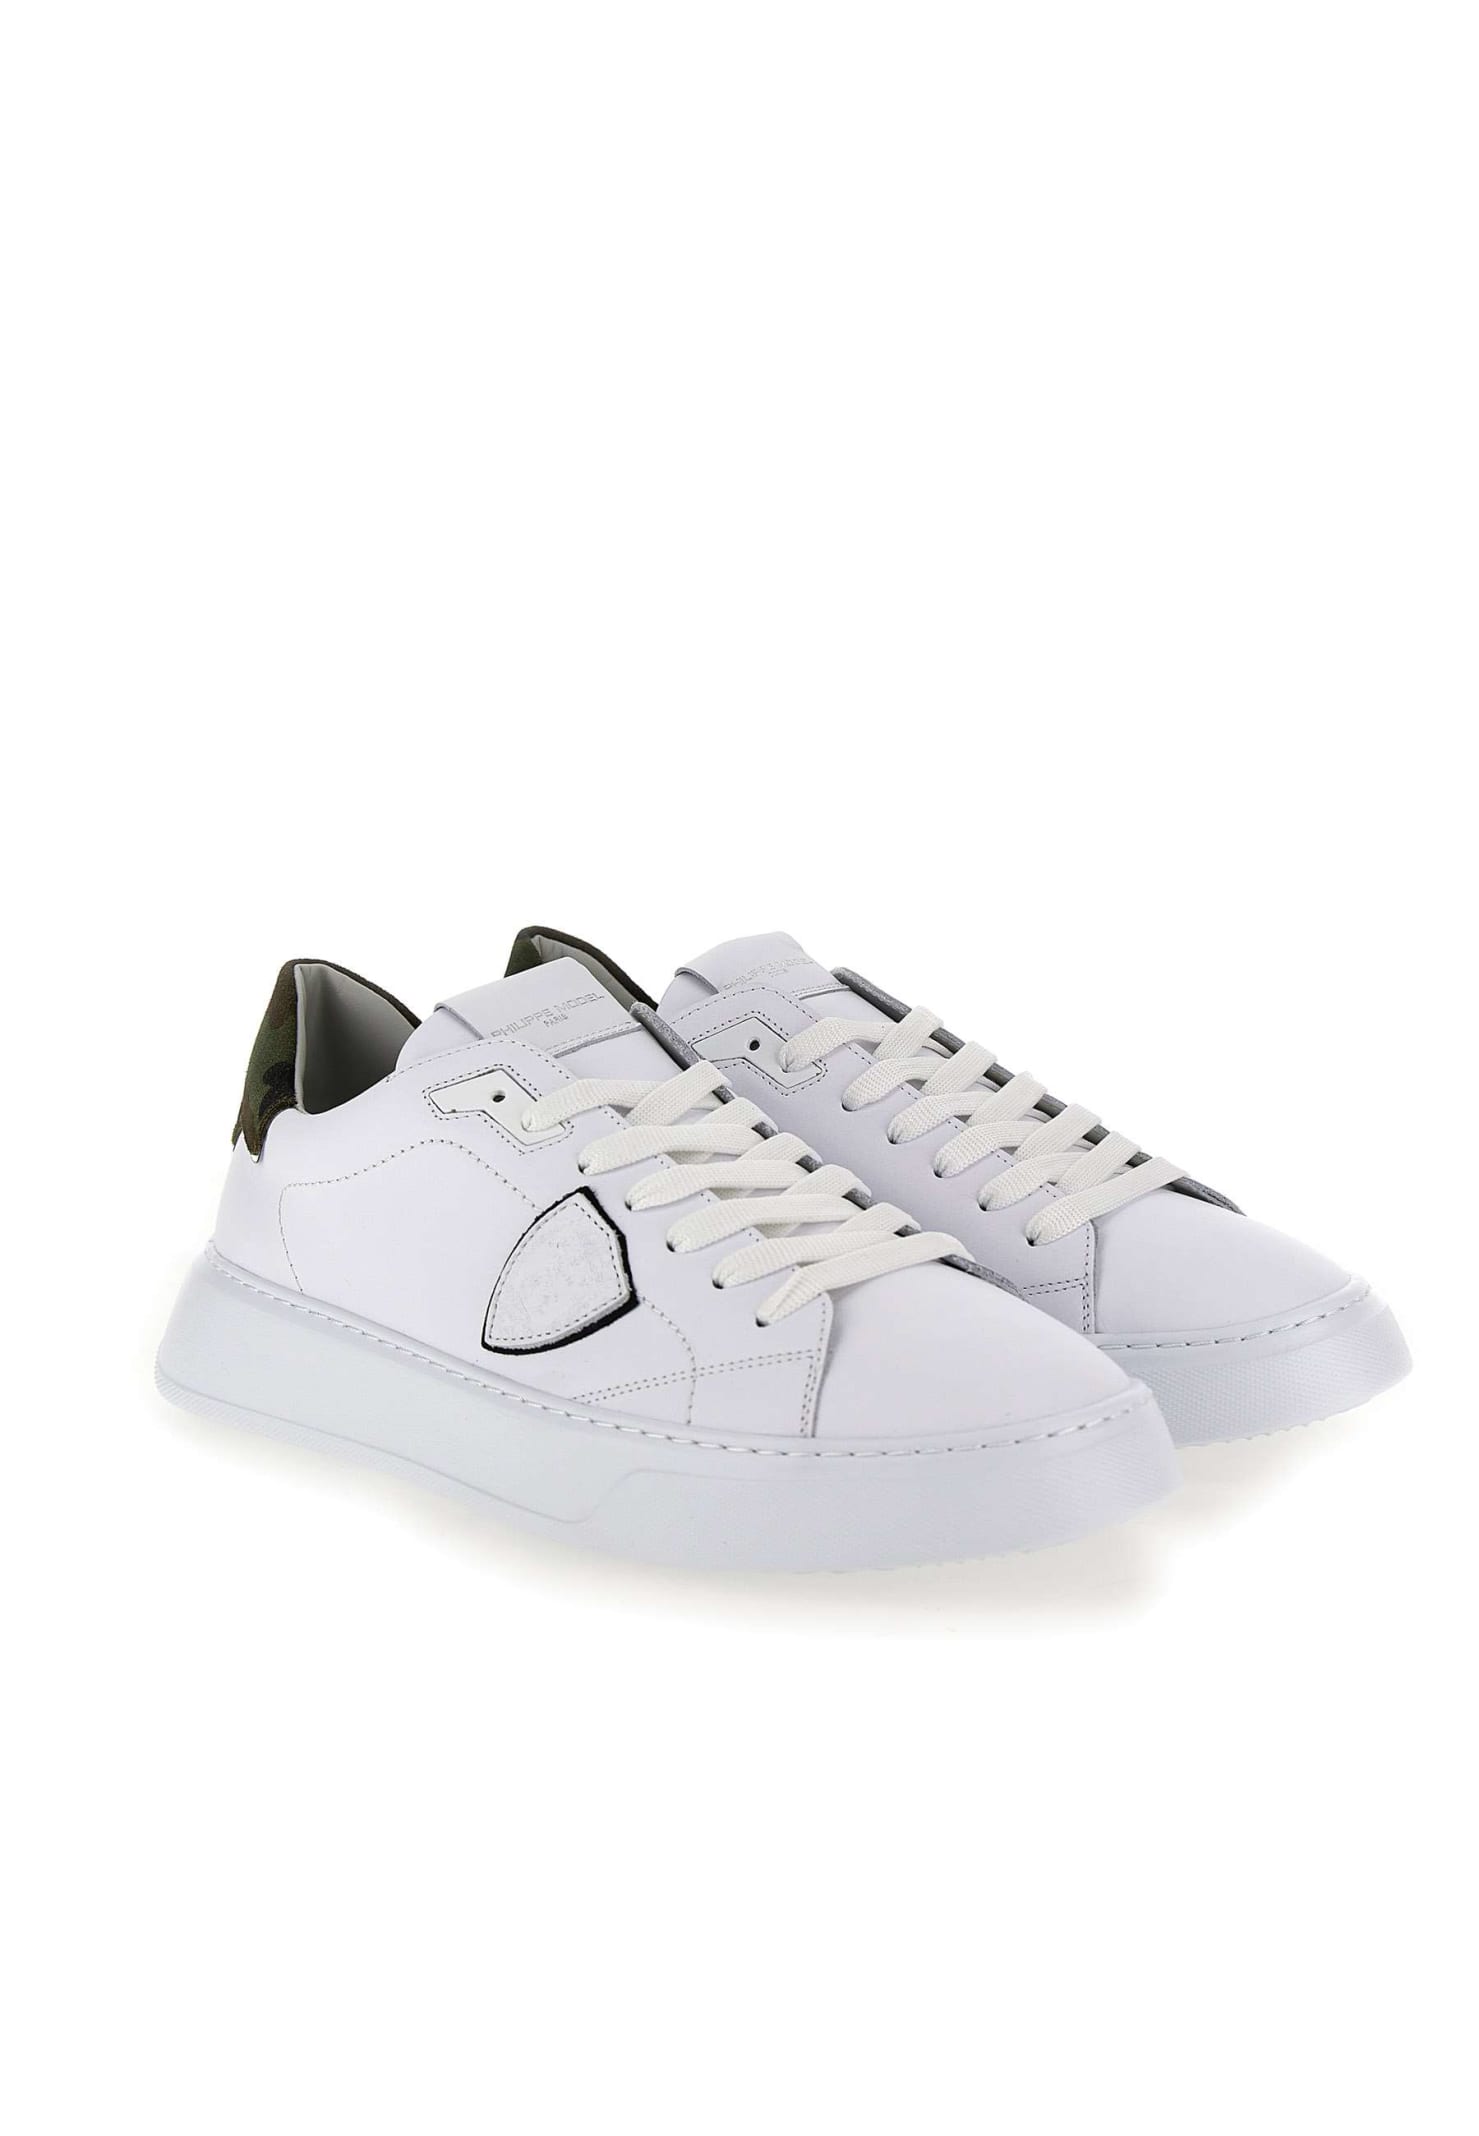 Philippe Model Temple Low Sneakers In White-black | ModeSens